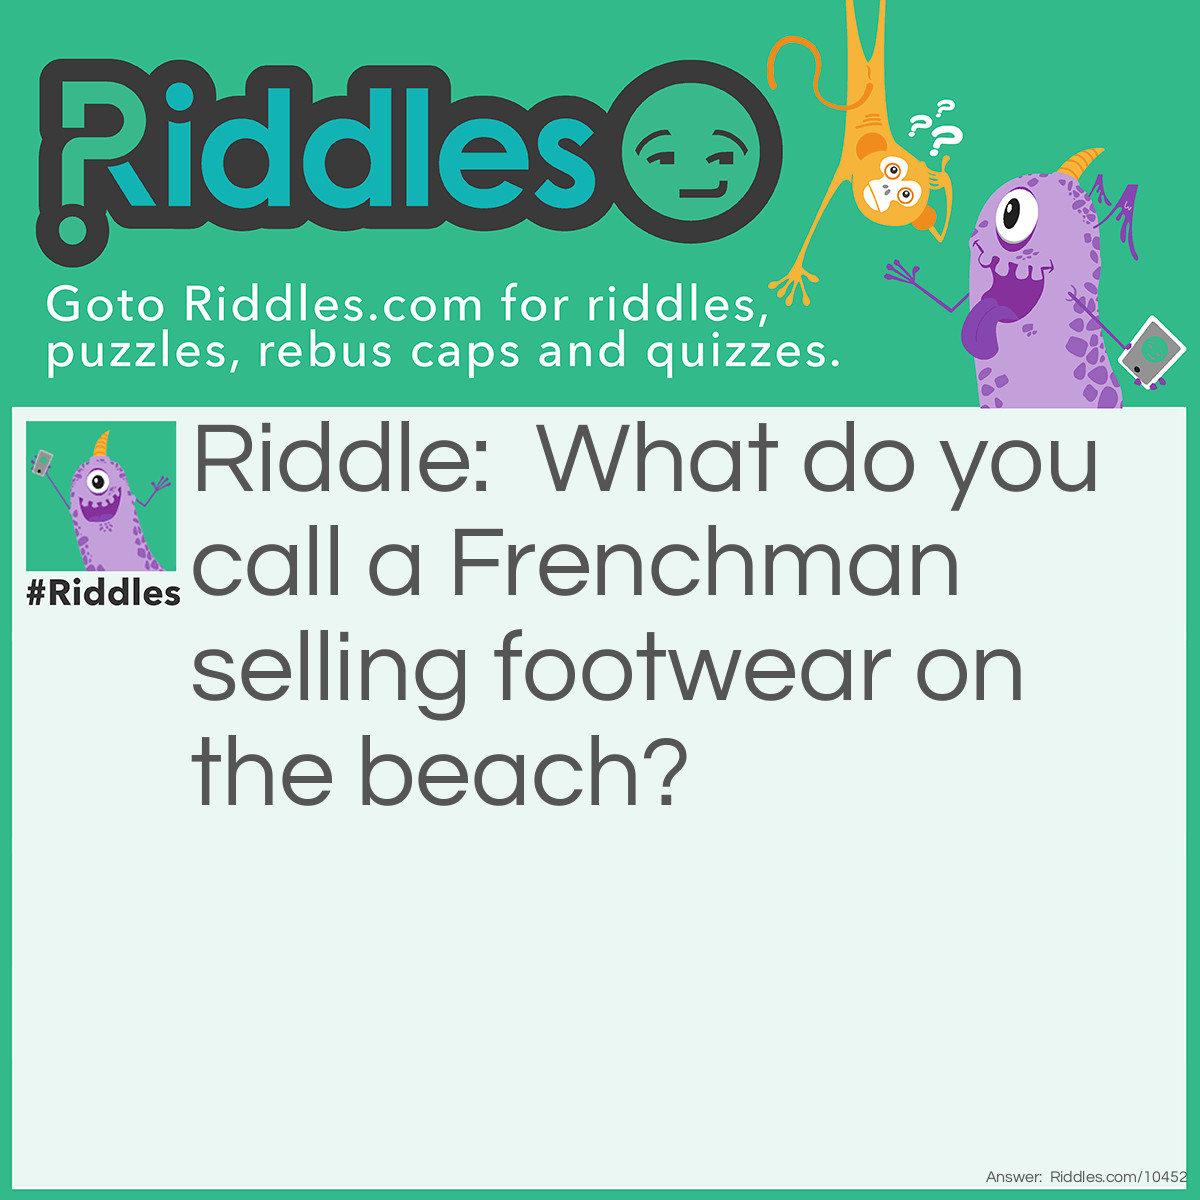 Riddle: What do you call a Frenchman selling footwear on the beach? Answer: Phillipe Fleepflop.